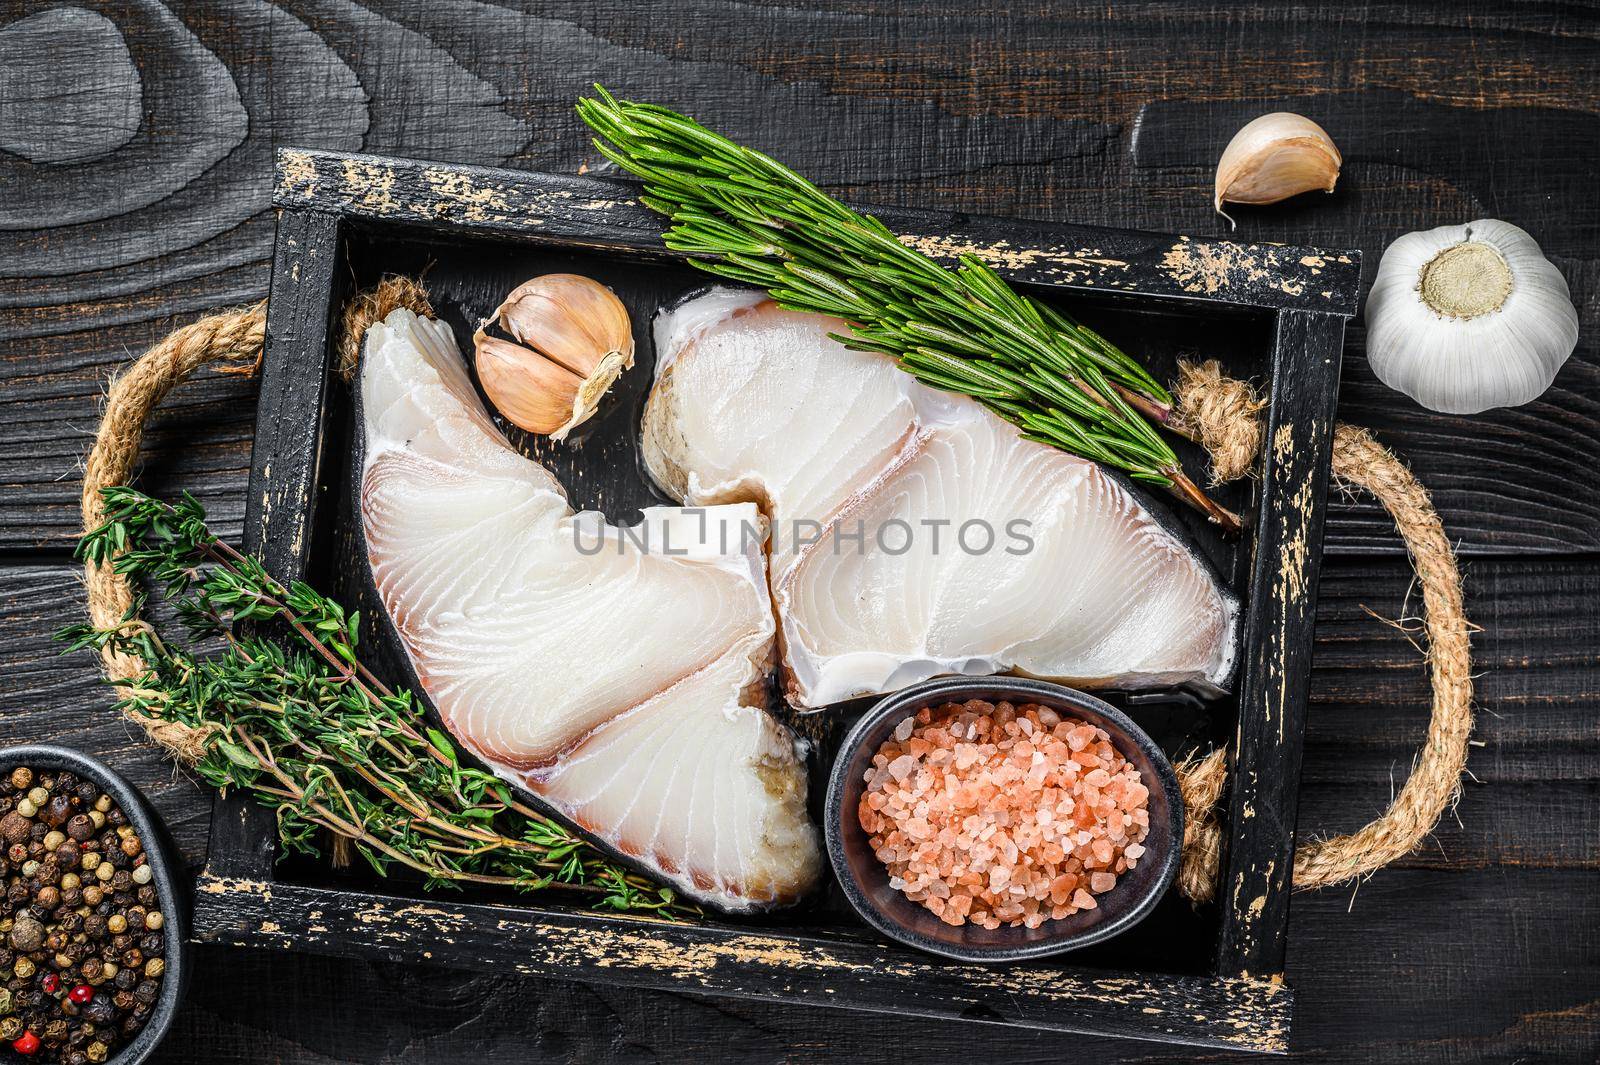 Shark raw fish steaks in a wooden tray with herbs. Black wooden background. Top view.